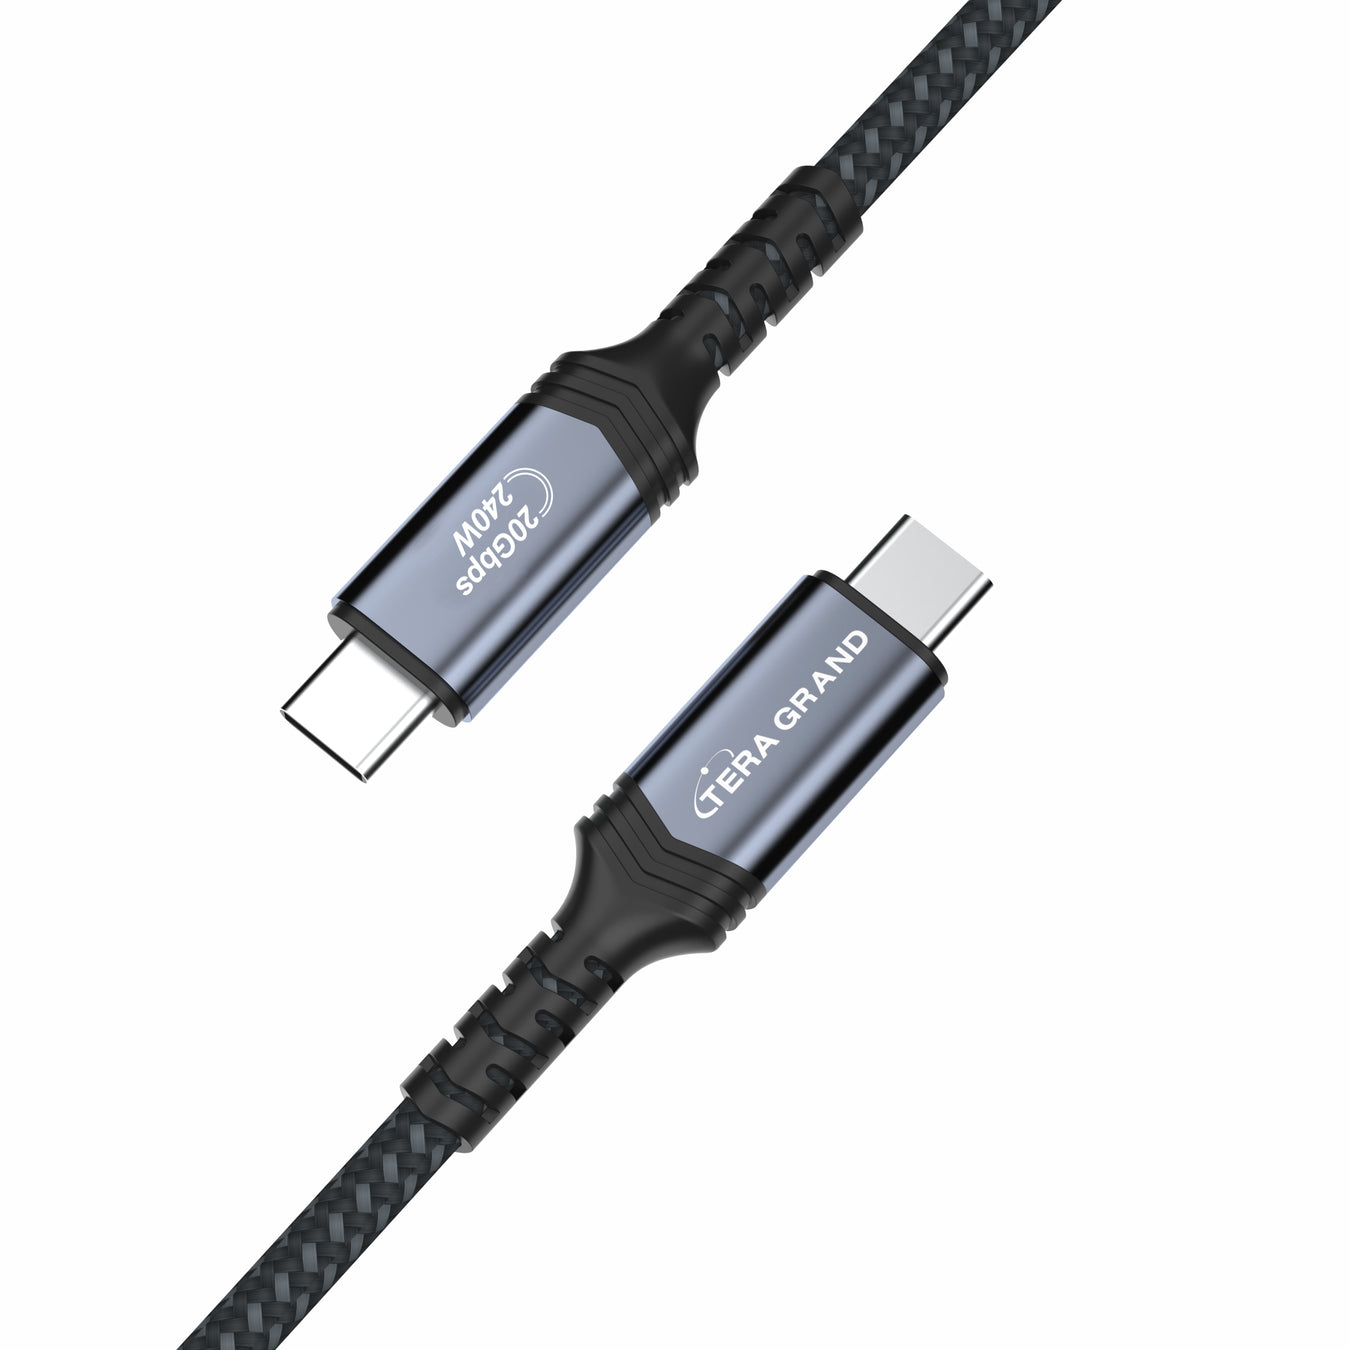 USB-C Cables and Adapters for iPhone 15, Apple, and Android Devices